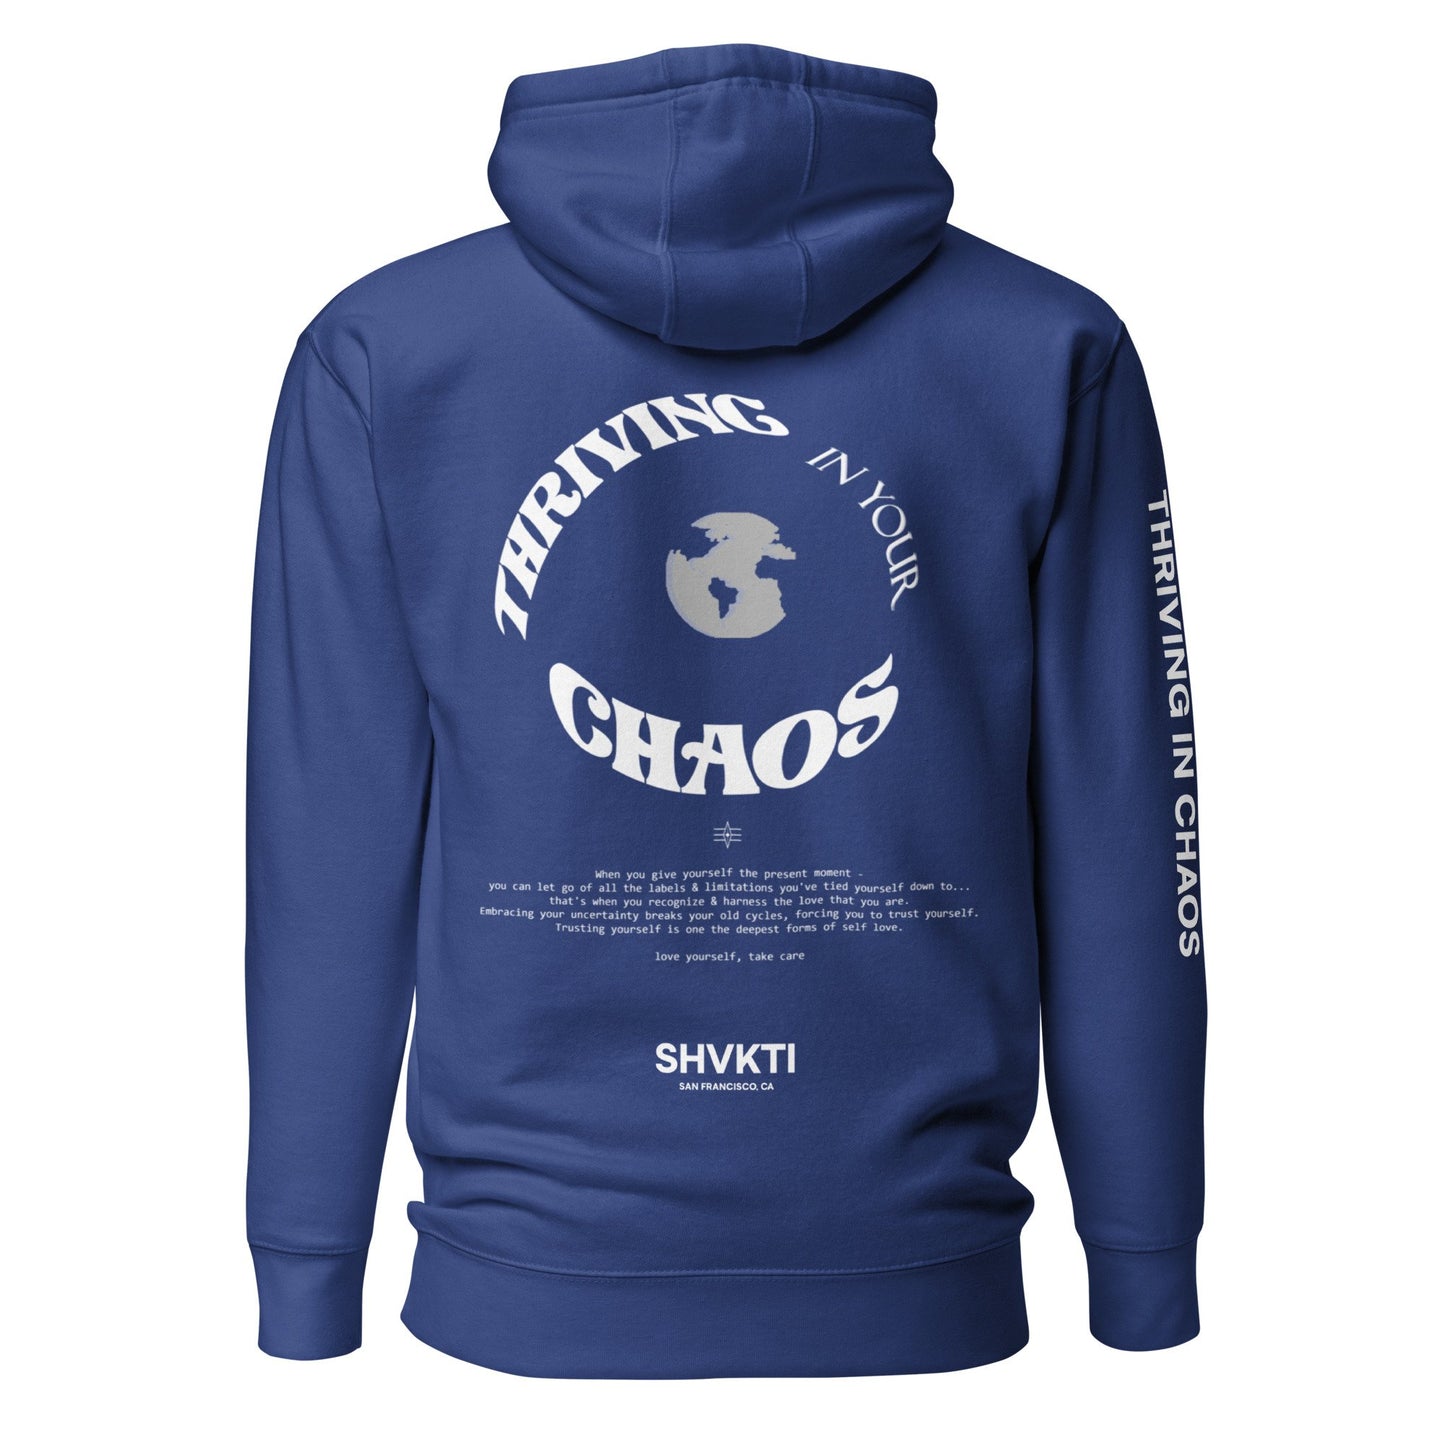 THRIVING IN CHAOS - OG GREY - REDUX